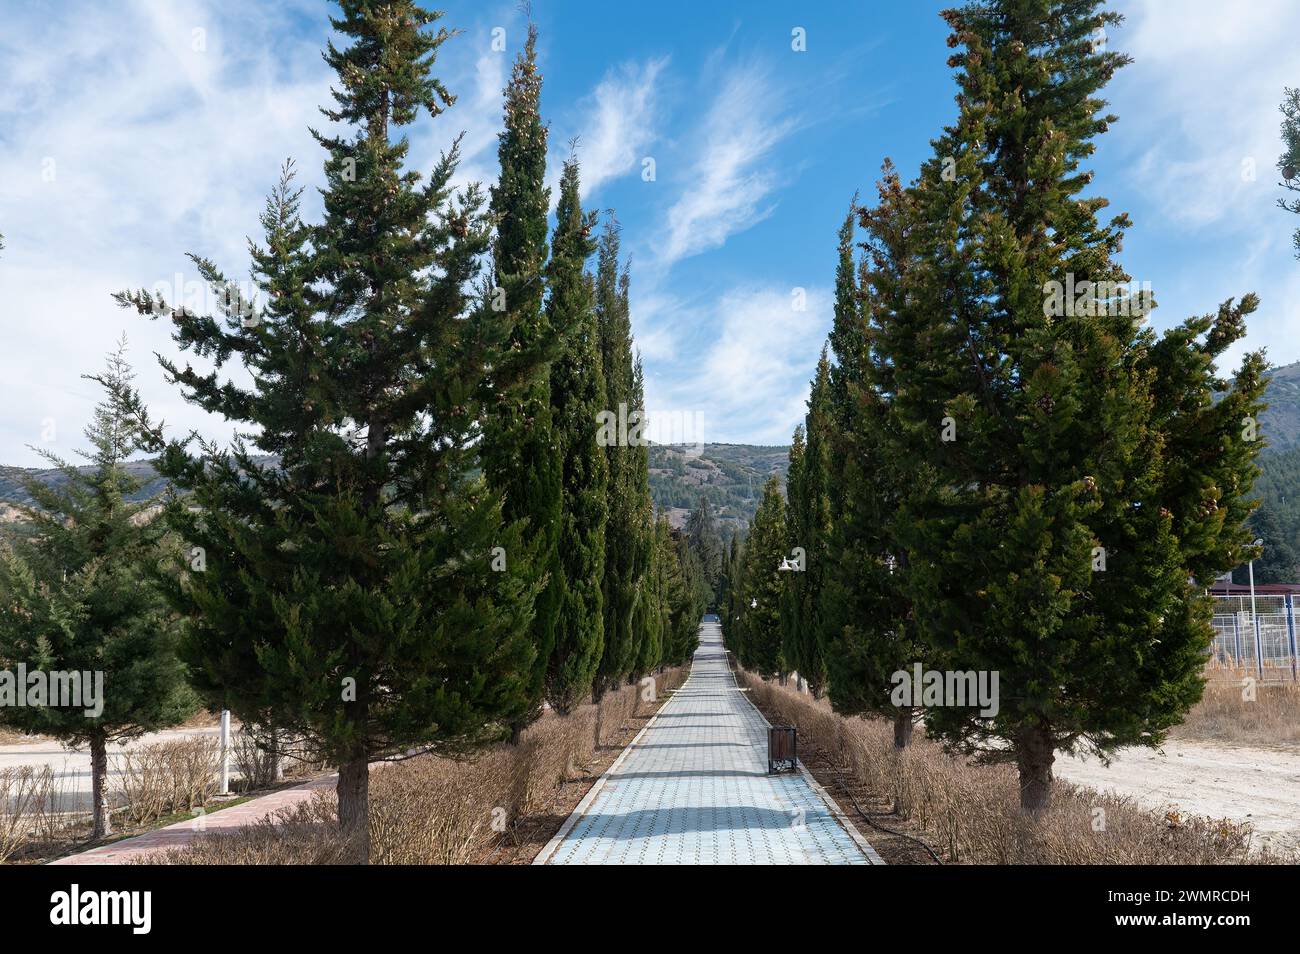 Walking path with cypress trees around it. Stock Photo